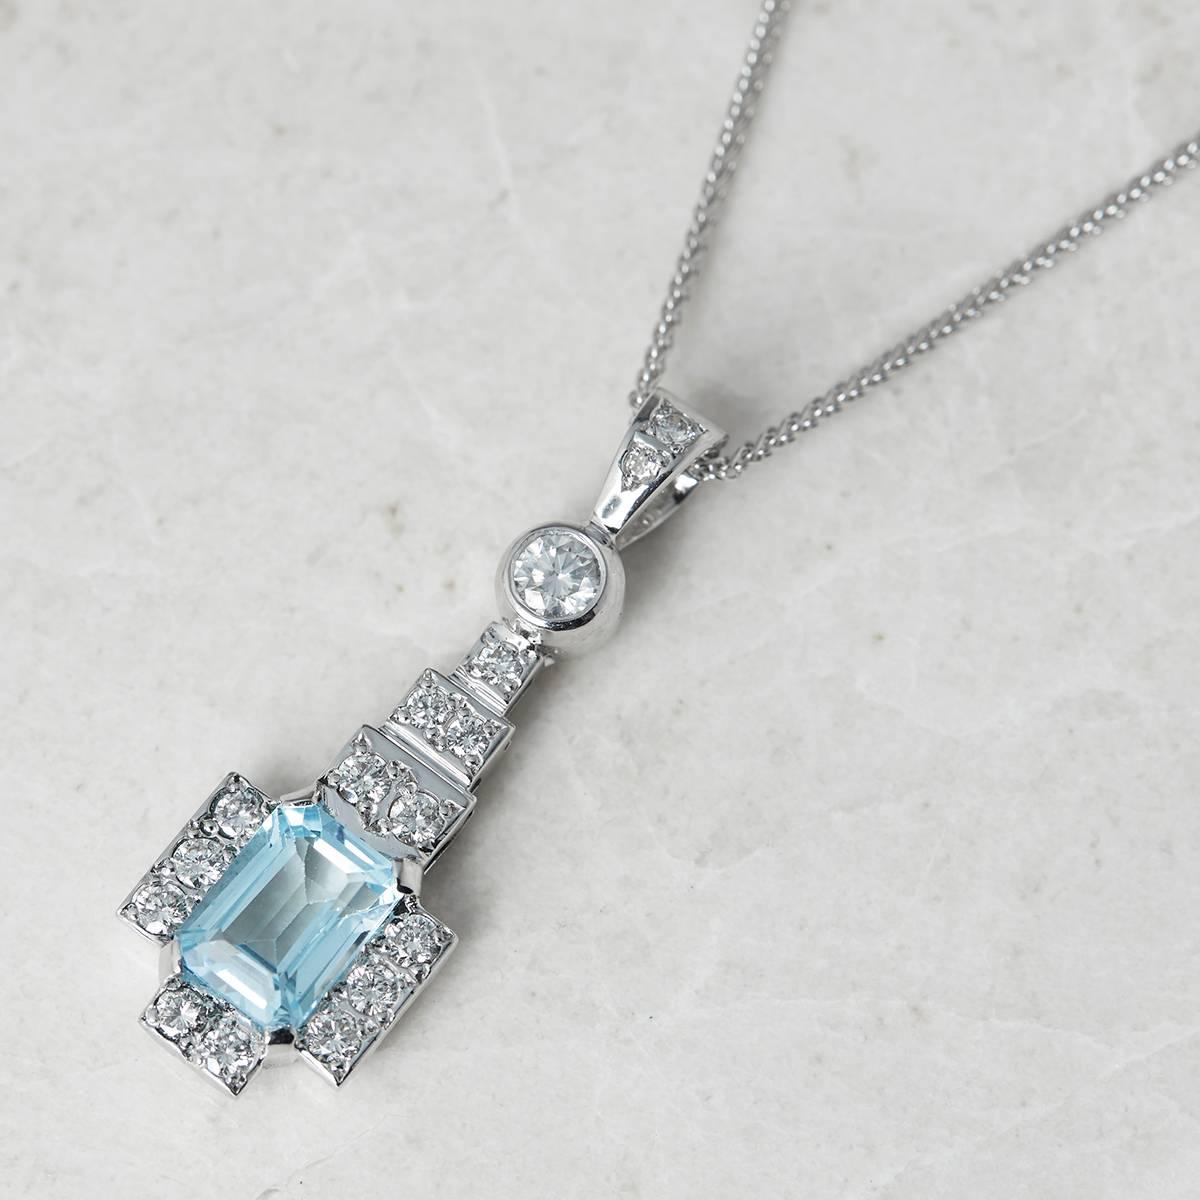 Xupes Code: COM699
Description: 18k White Gold Blue Topaz & Diamond Necklace
Accompanied With: Xupes Presentation Box
Gender: Ladies
Pendant Length: 3.3cm
Pendant Width: 1.2cm
Clasp Type: Lobster
Condition: 9
Material: White Gold
Total Weight: